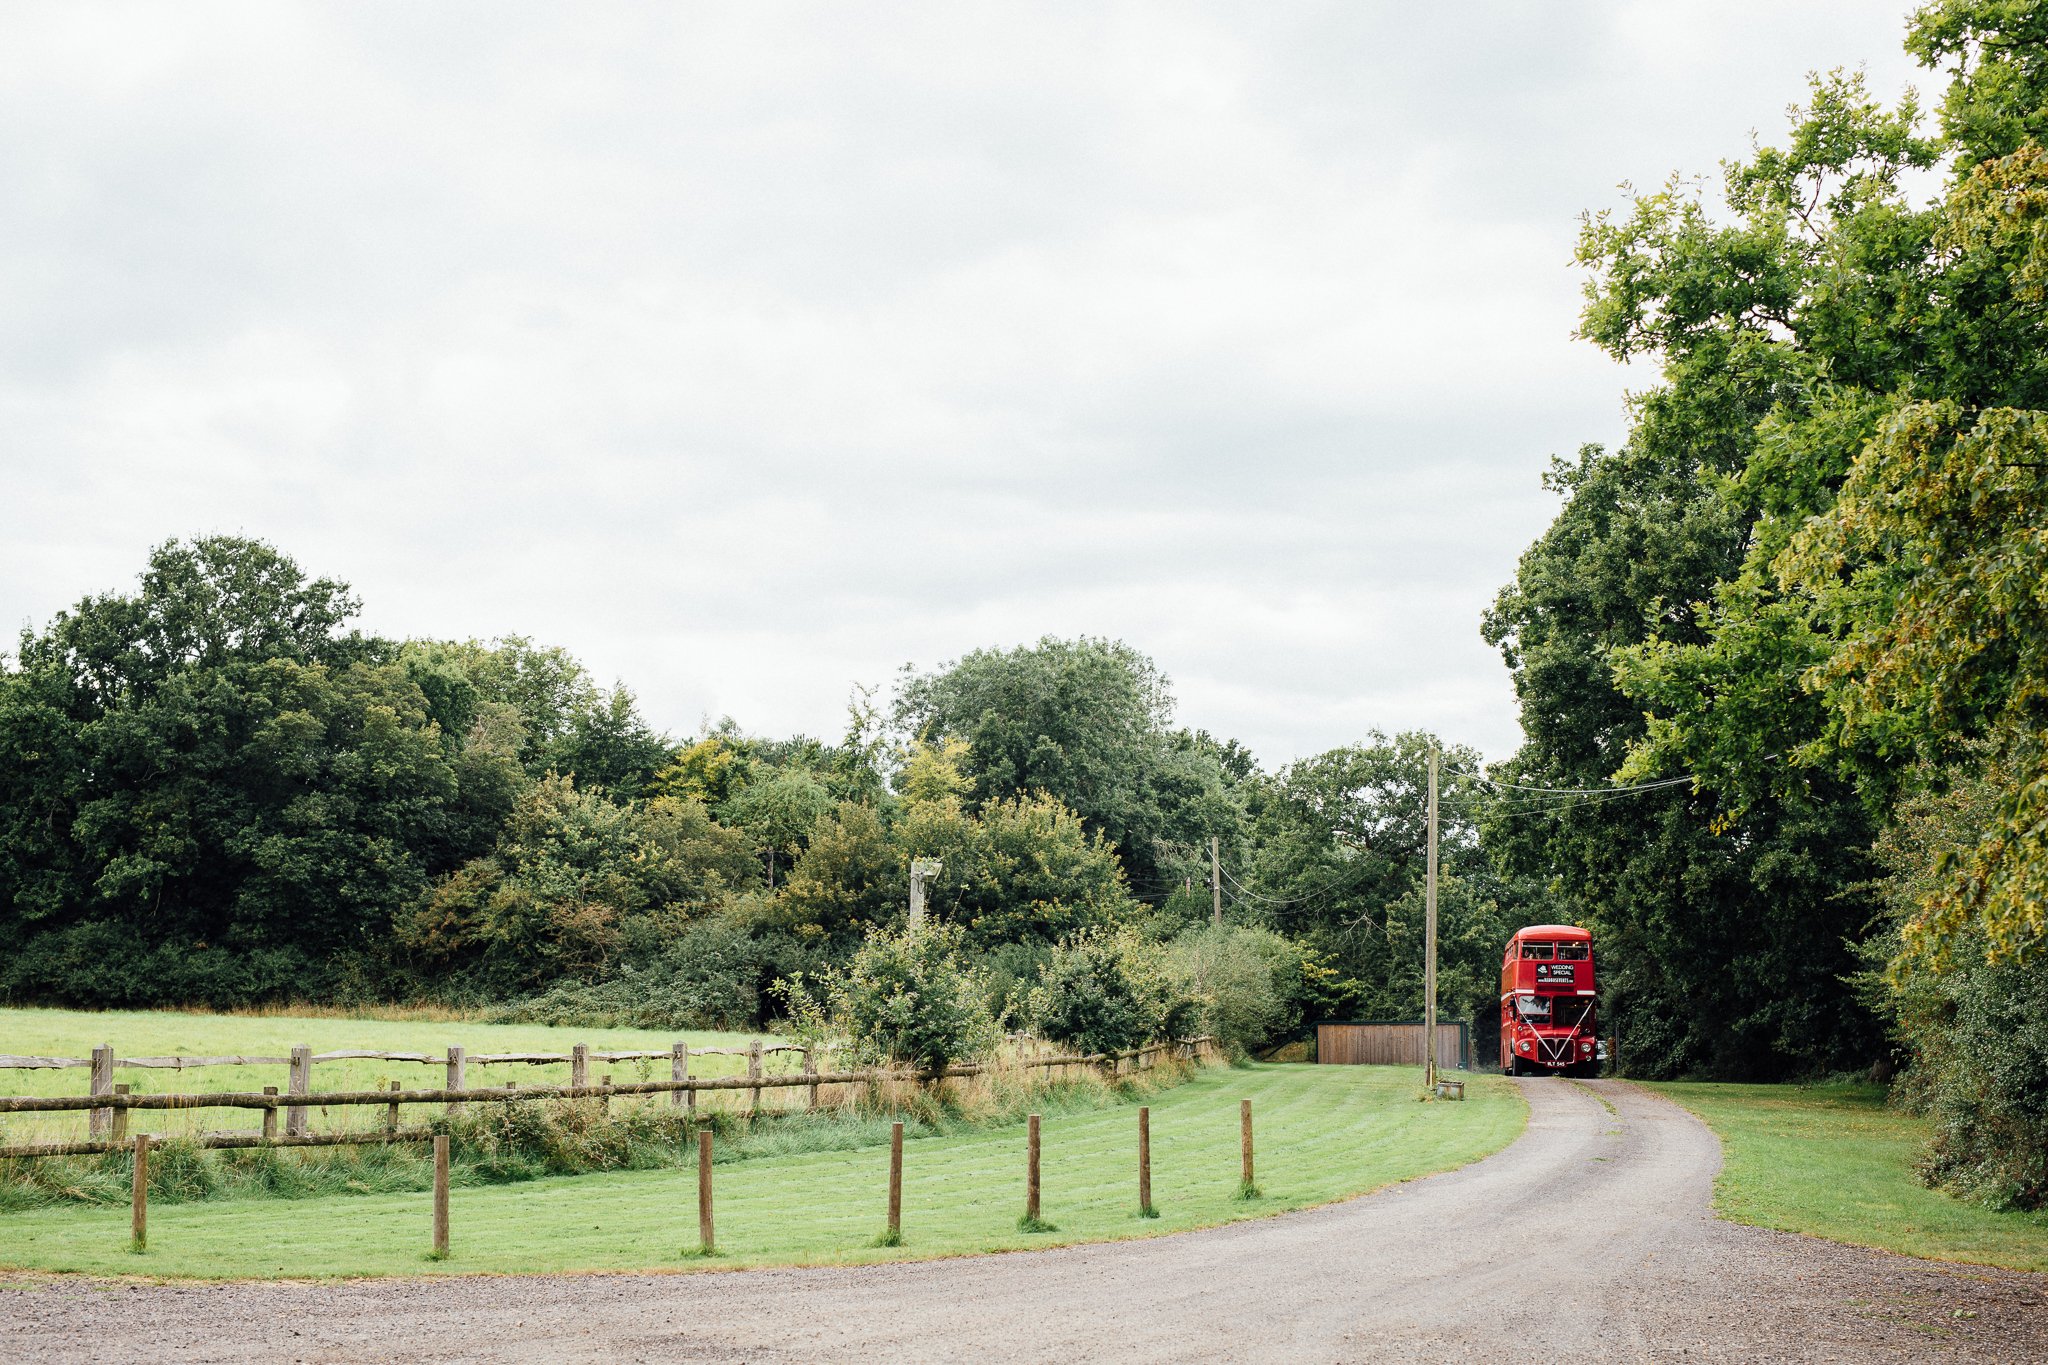  Wedding bus approaches Gildings Barns in Newdigate Surrey 